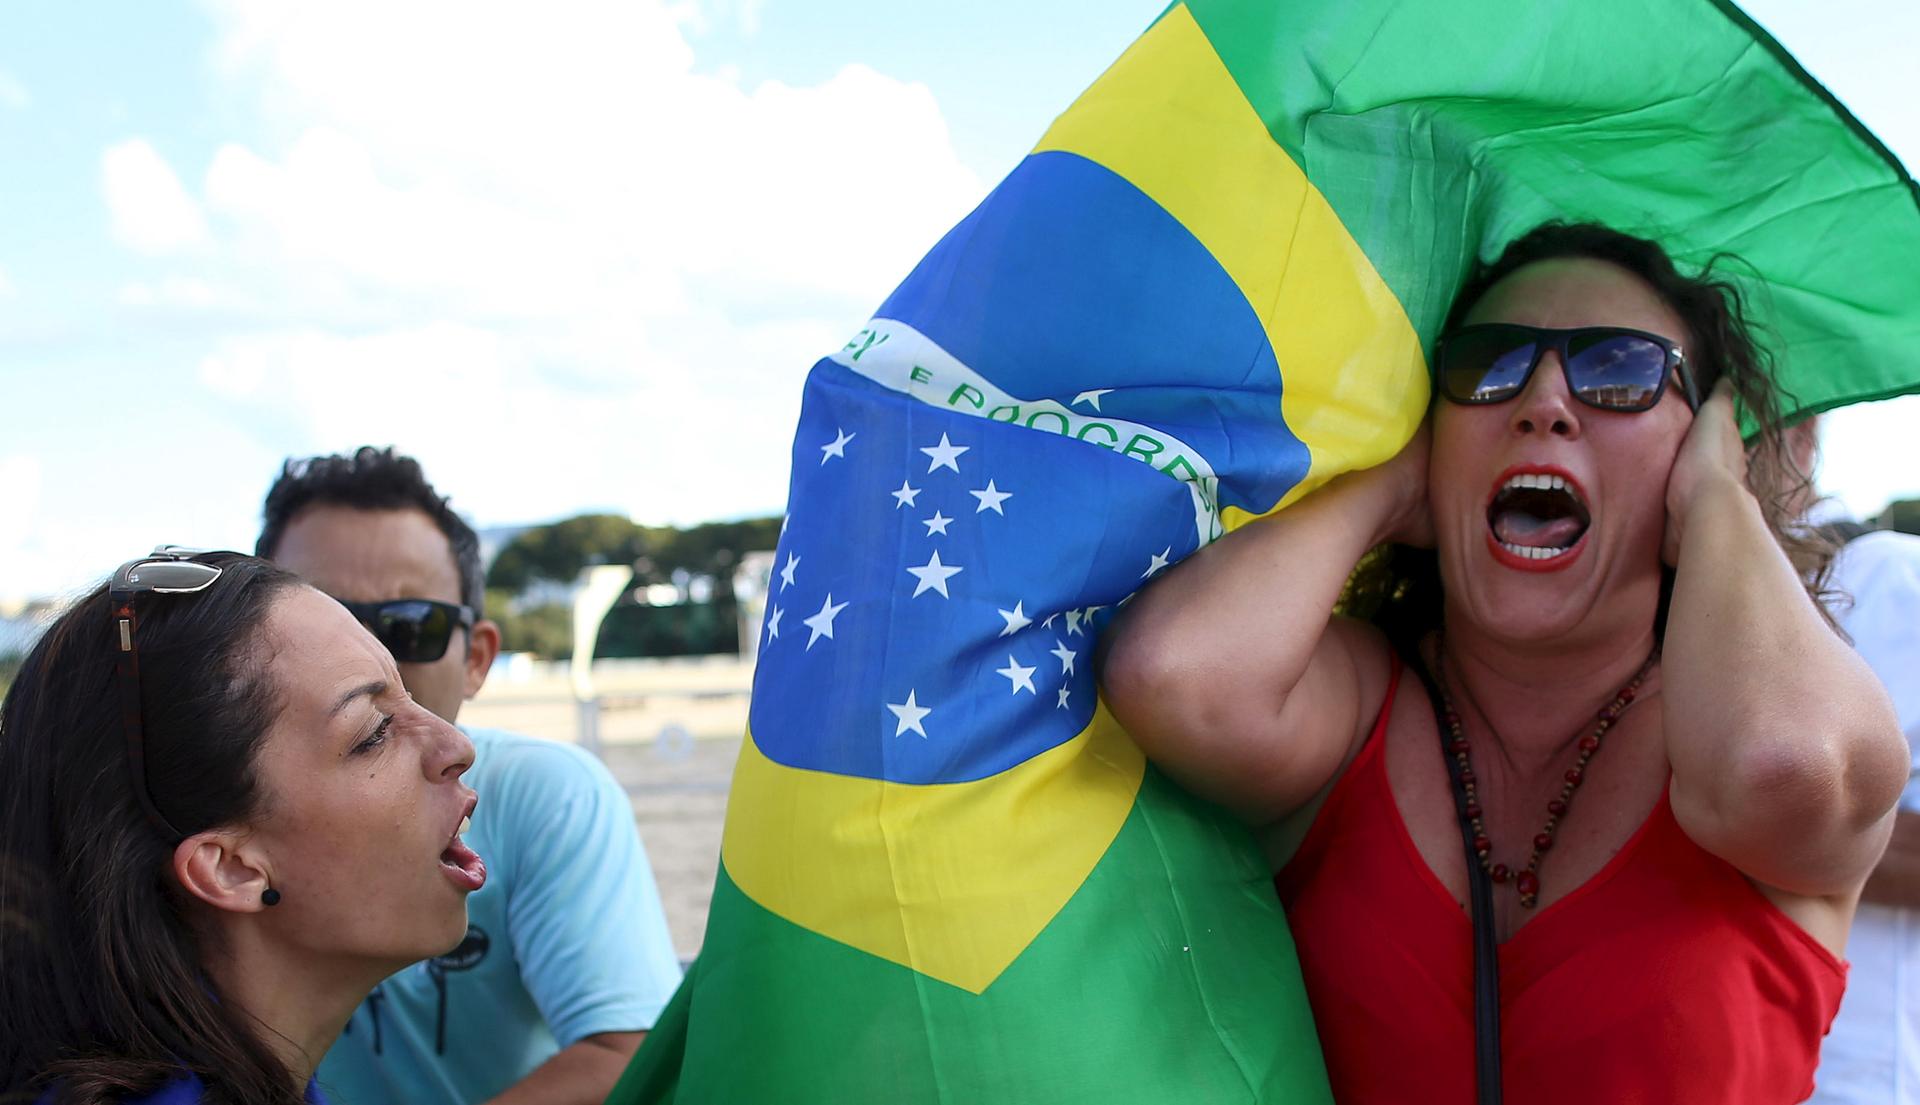 An anti-government demonstrator (L) shouts slogans against a supporter of Brazil's President Dilma Rousseff during a protest against the appointment of former President Luiz Inacio Lula da Silva as a minister, in front of the Planalto Palace in Brasilia,